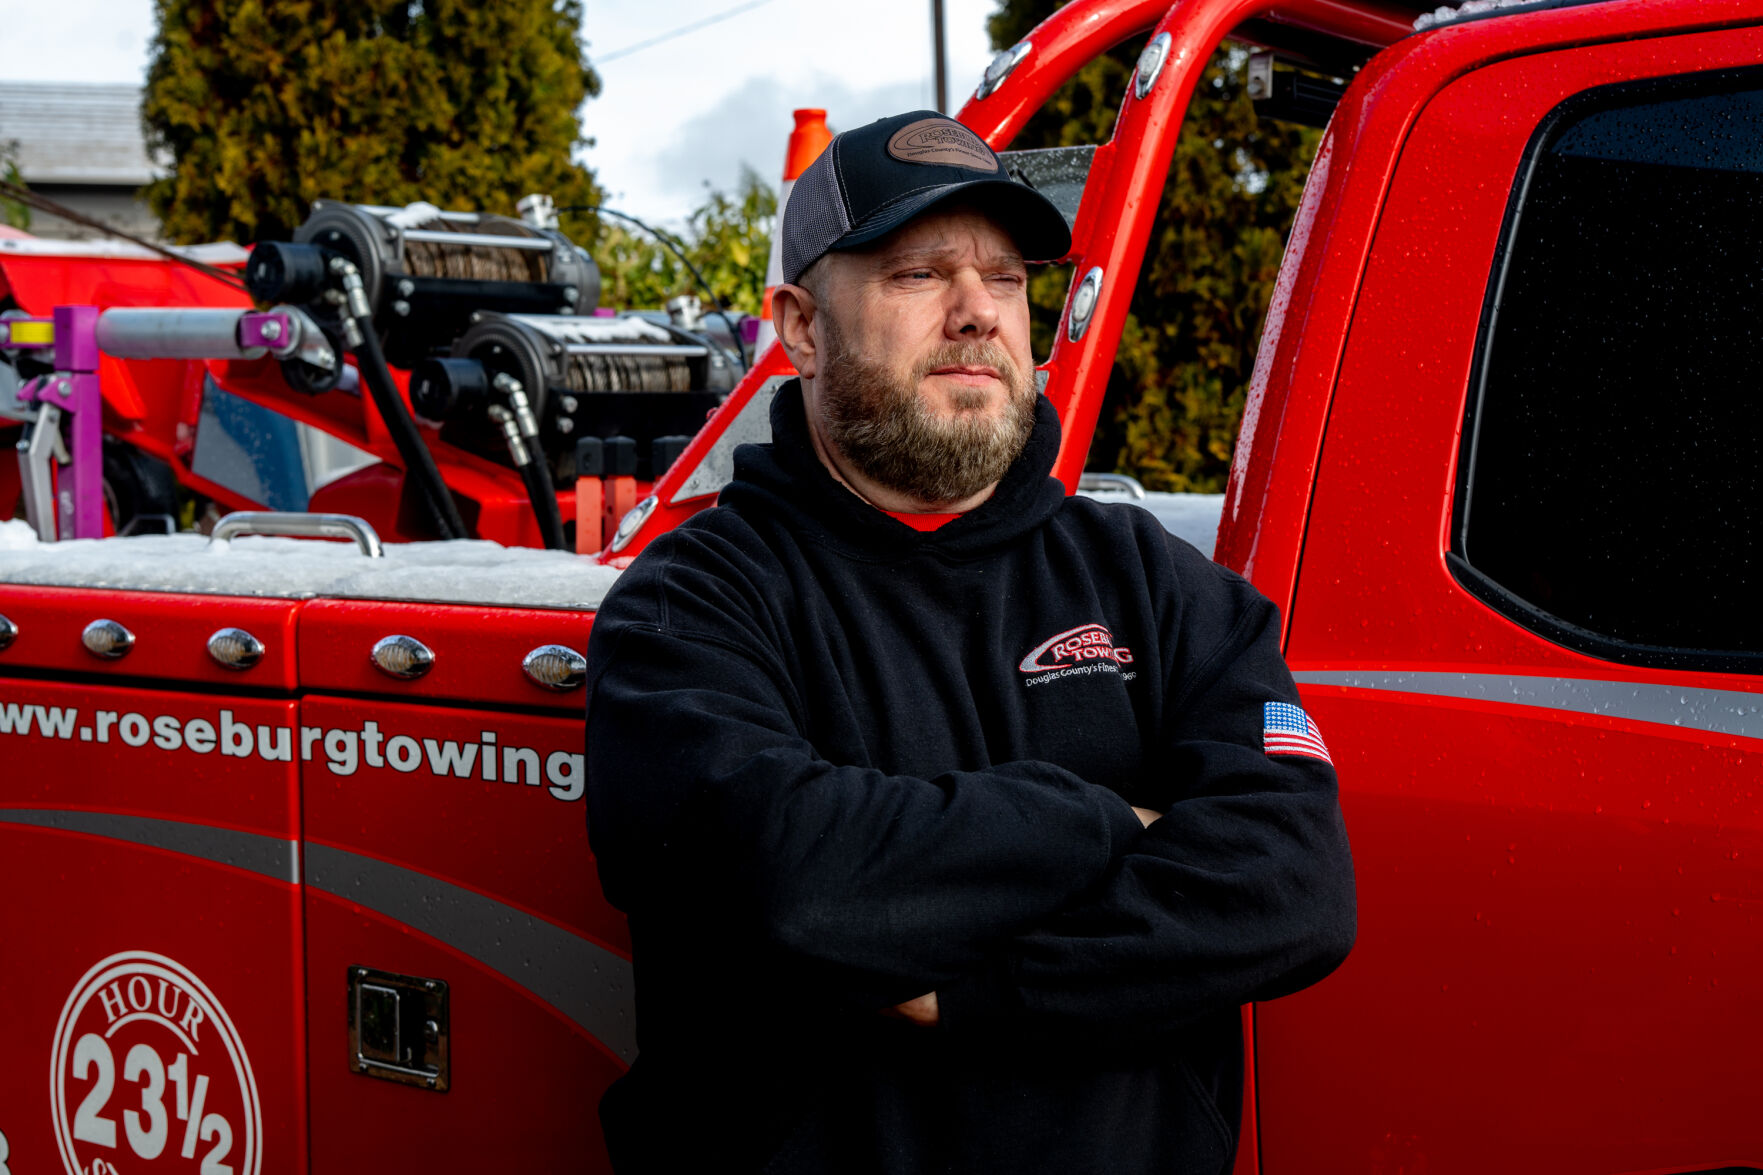 Snow days make busy days for local tow truck drivers | News